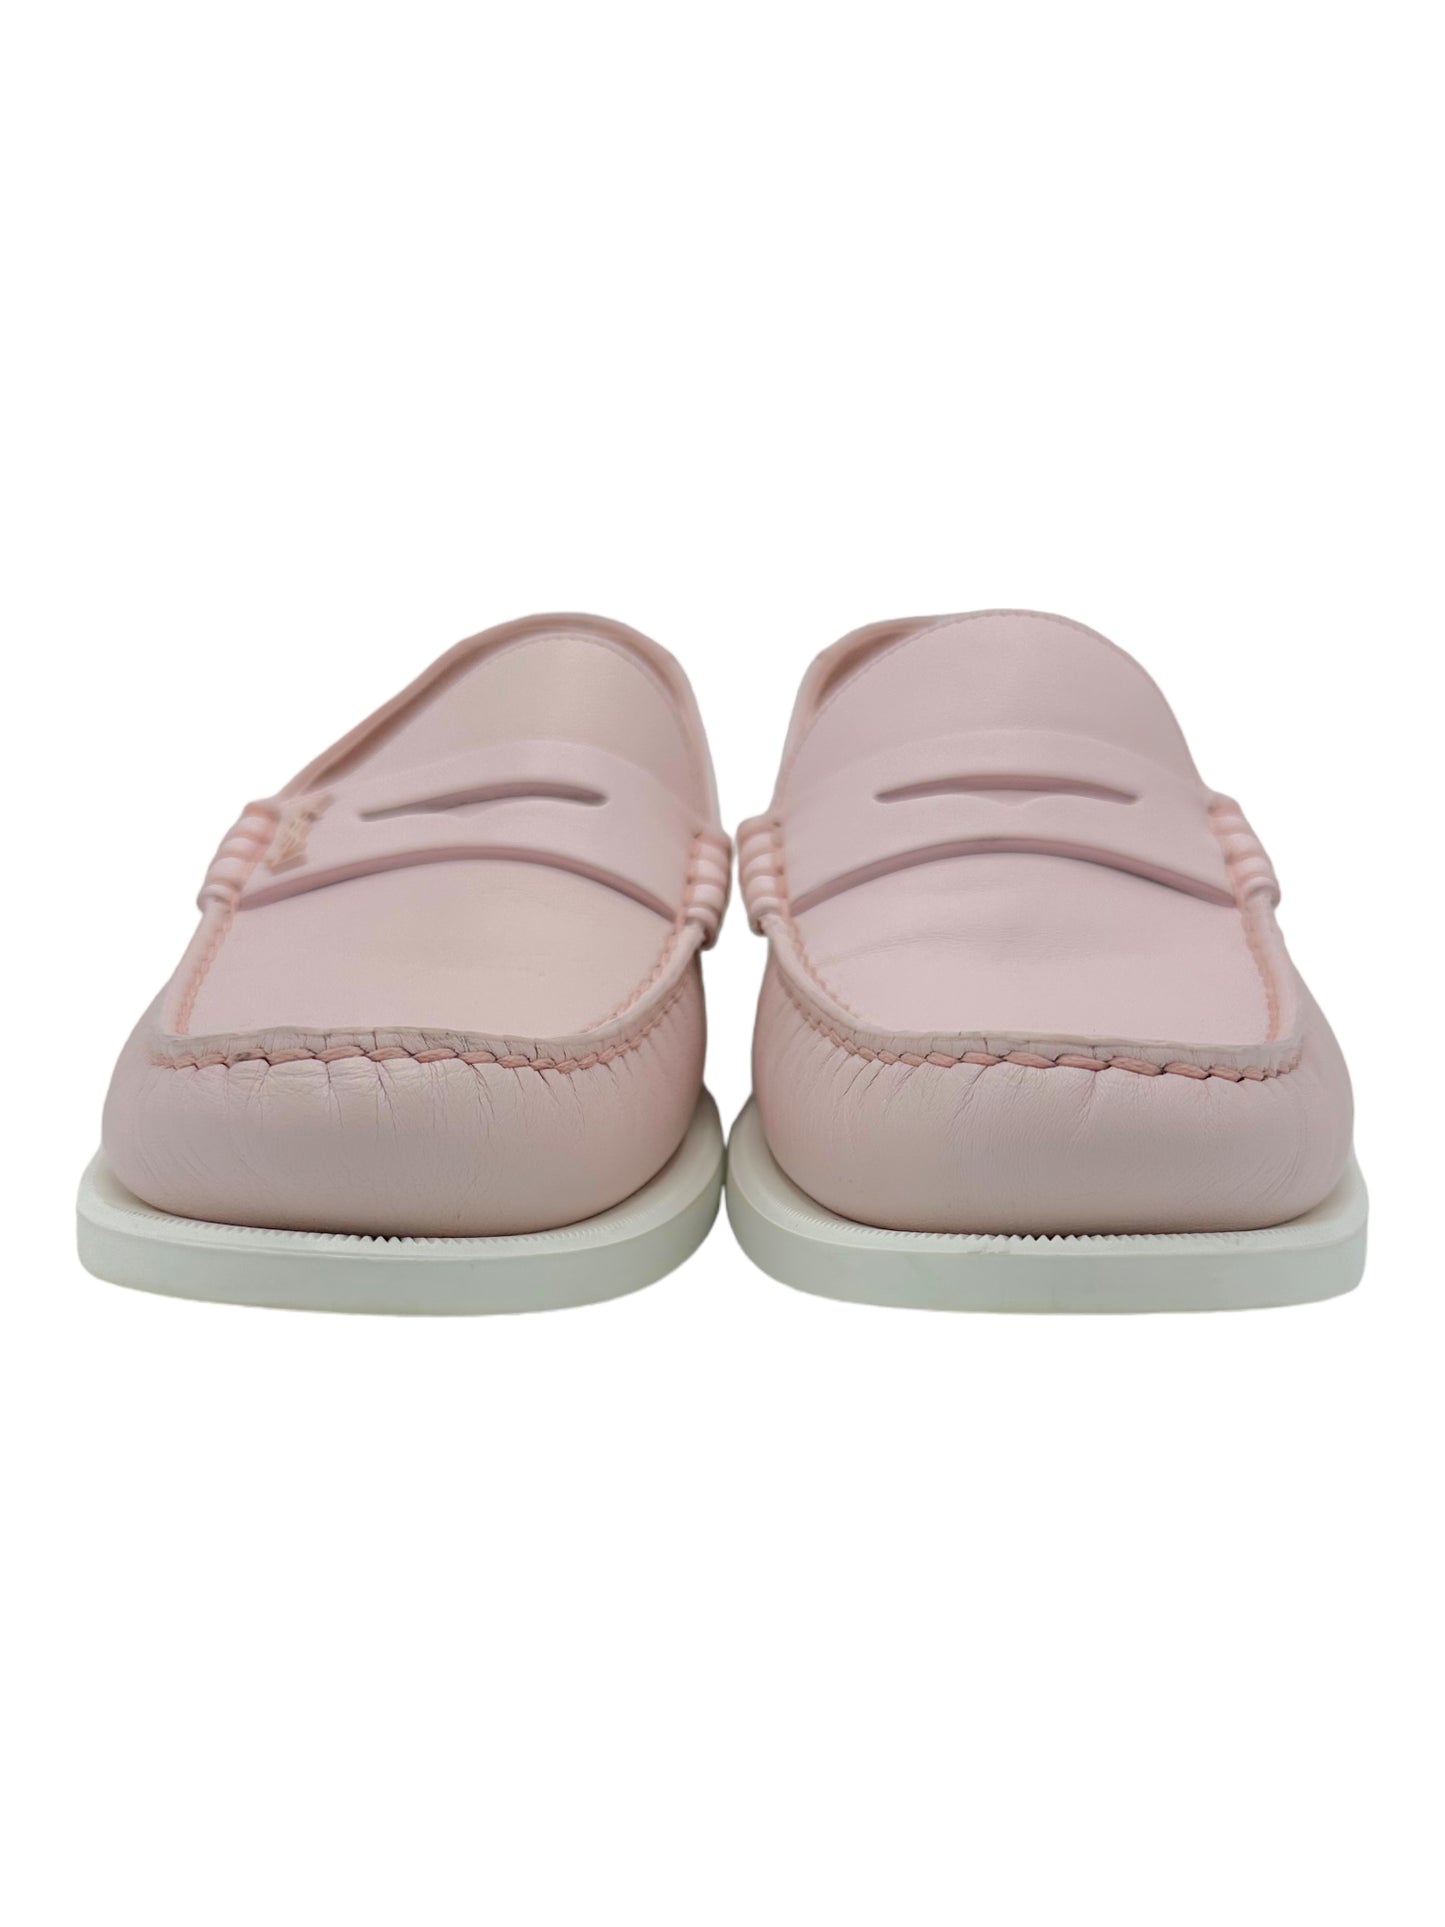 Saint Laurent Le Monogram Pink Penny Loafer - Genuine Design luxury consignment Calgary, Canada New and pre-owned clothing, shoes, accessories.